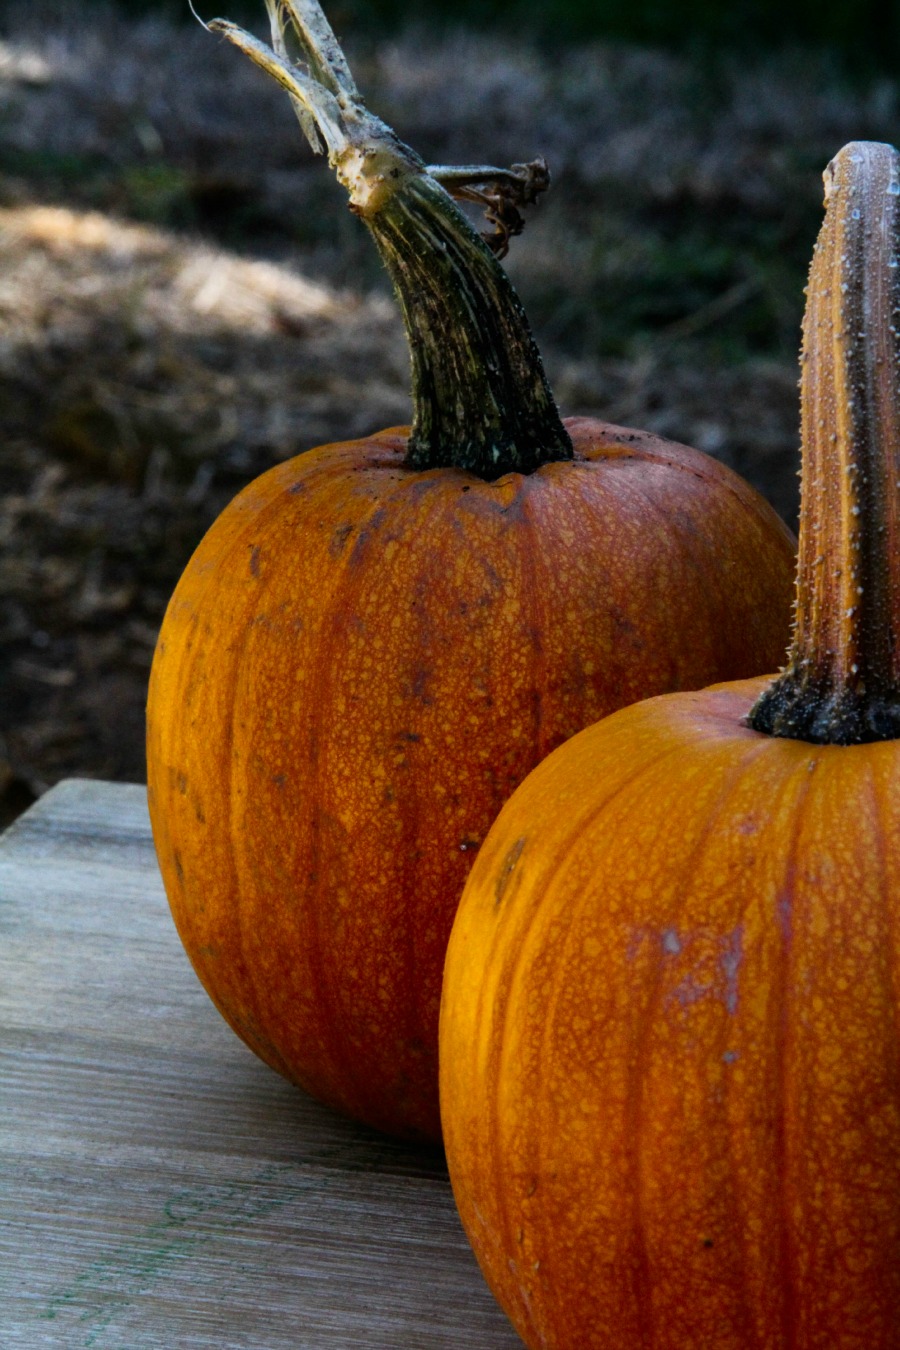 How To Make All Natural Pumpkin Butter | Growing Up Herbal | Pumpkins mean fall has officially arrived. Grab a kid and make some delicious, all natural pumpkin butter today!